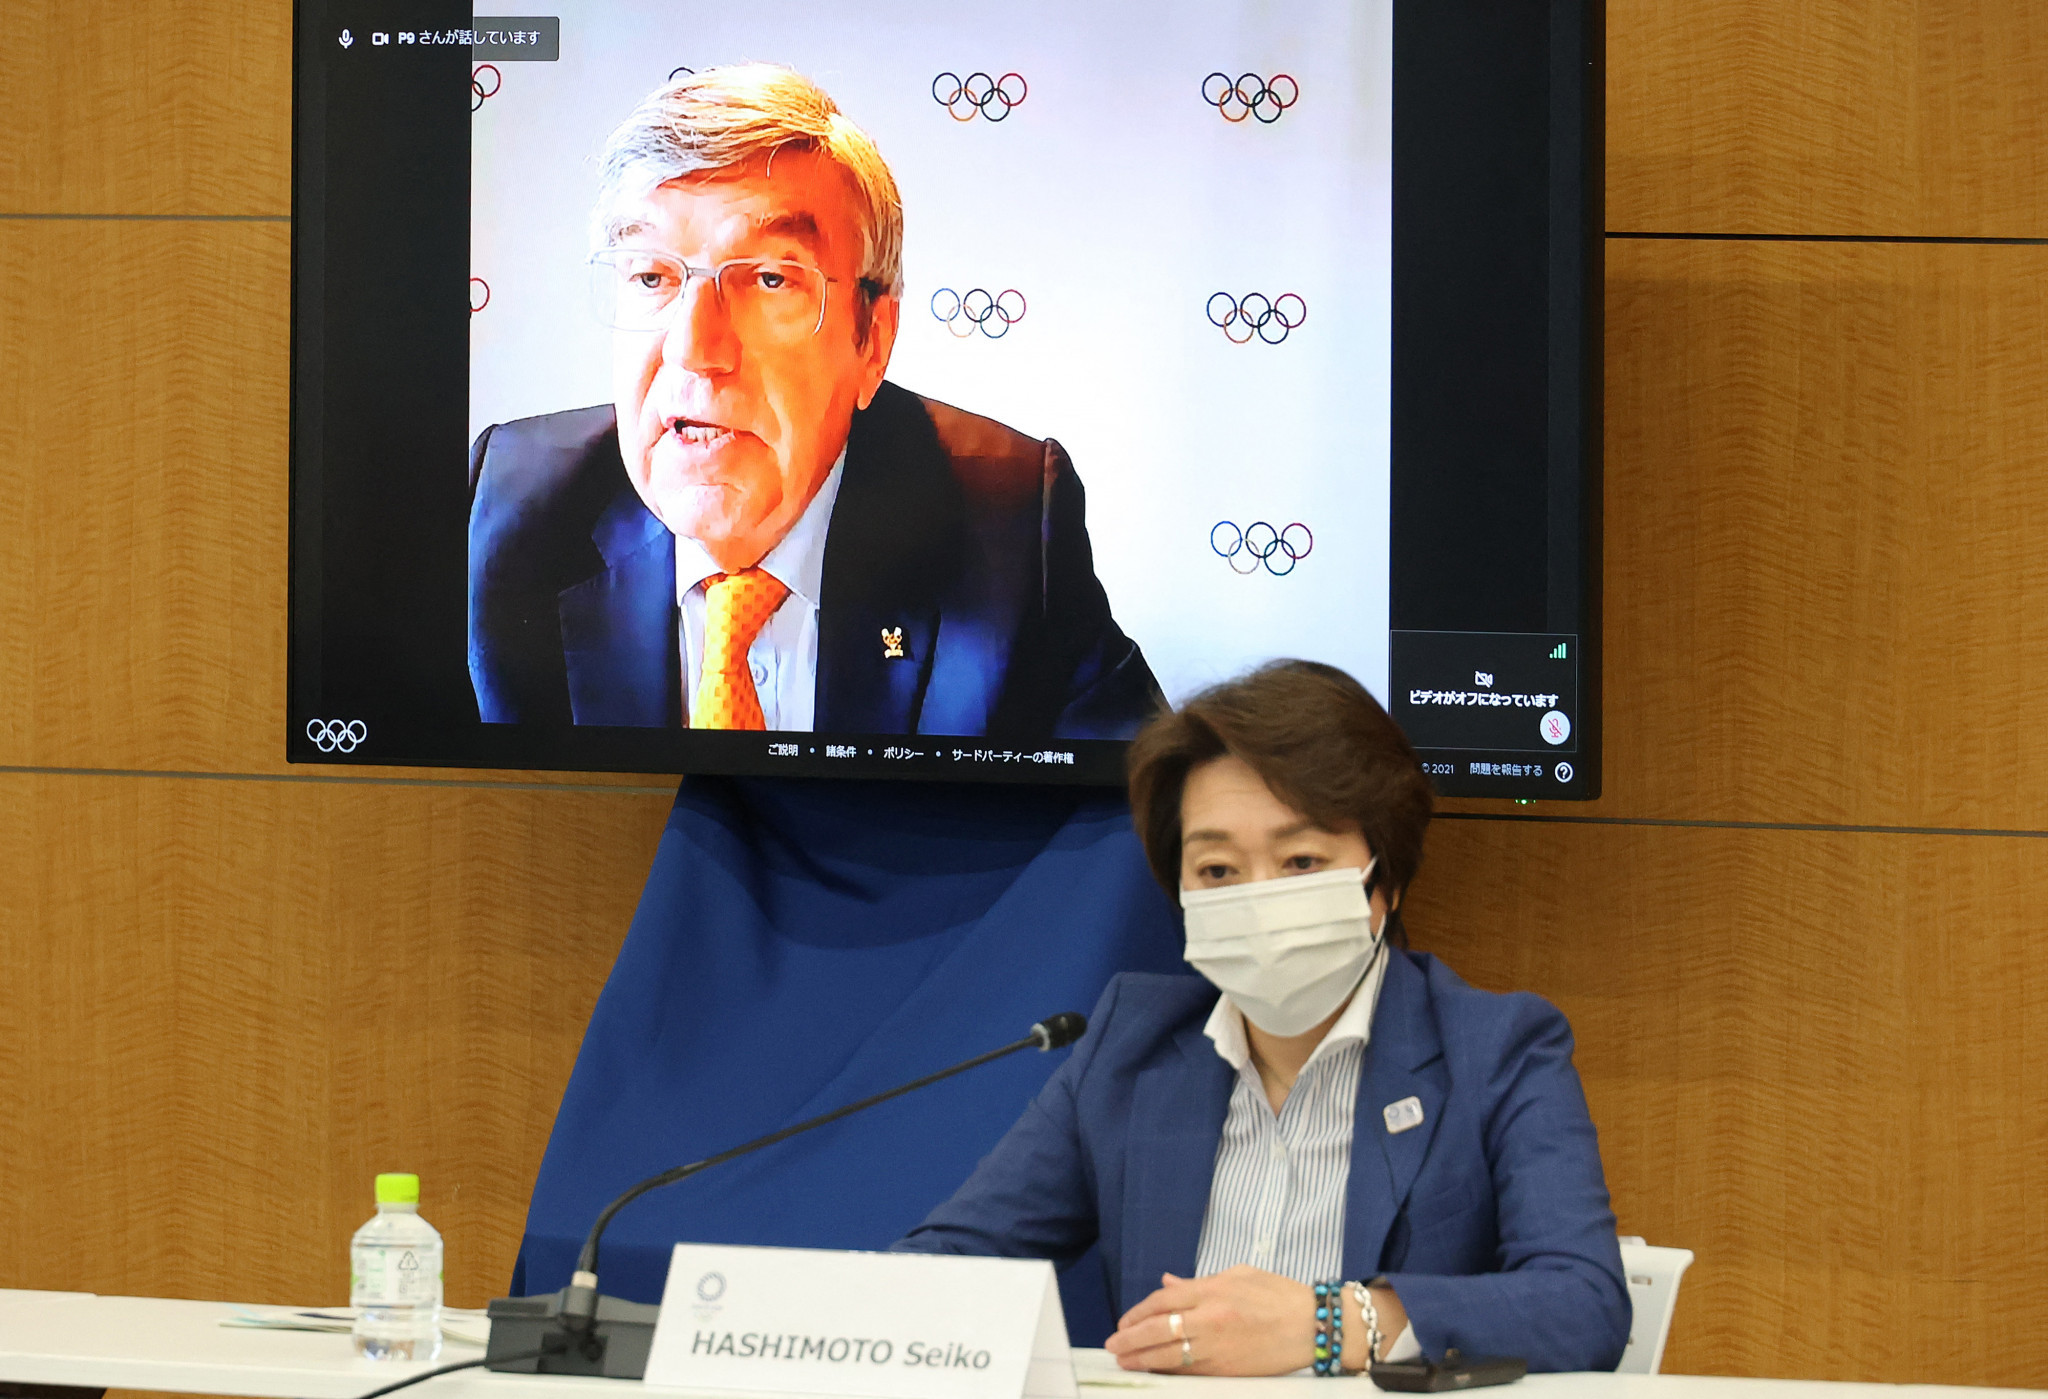 IOC President Thomas Bach has tried to appease the Japanese public as the Coordination Commission opened ©Getty Images